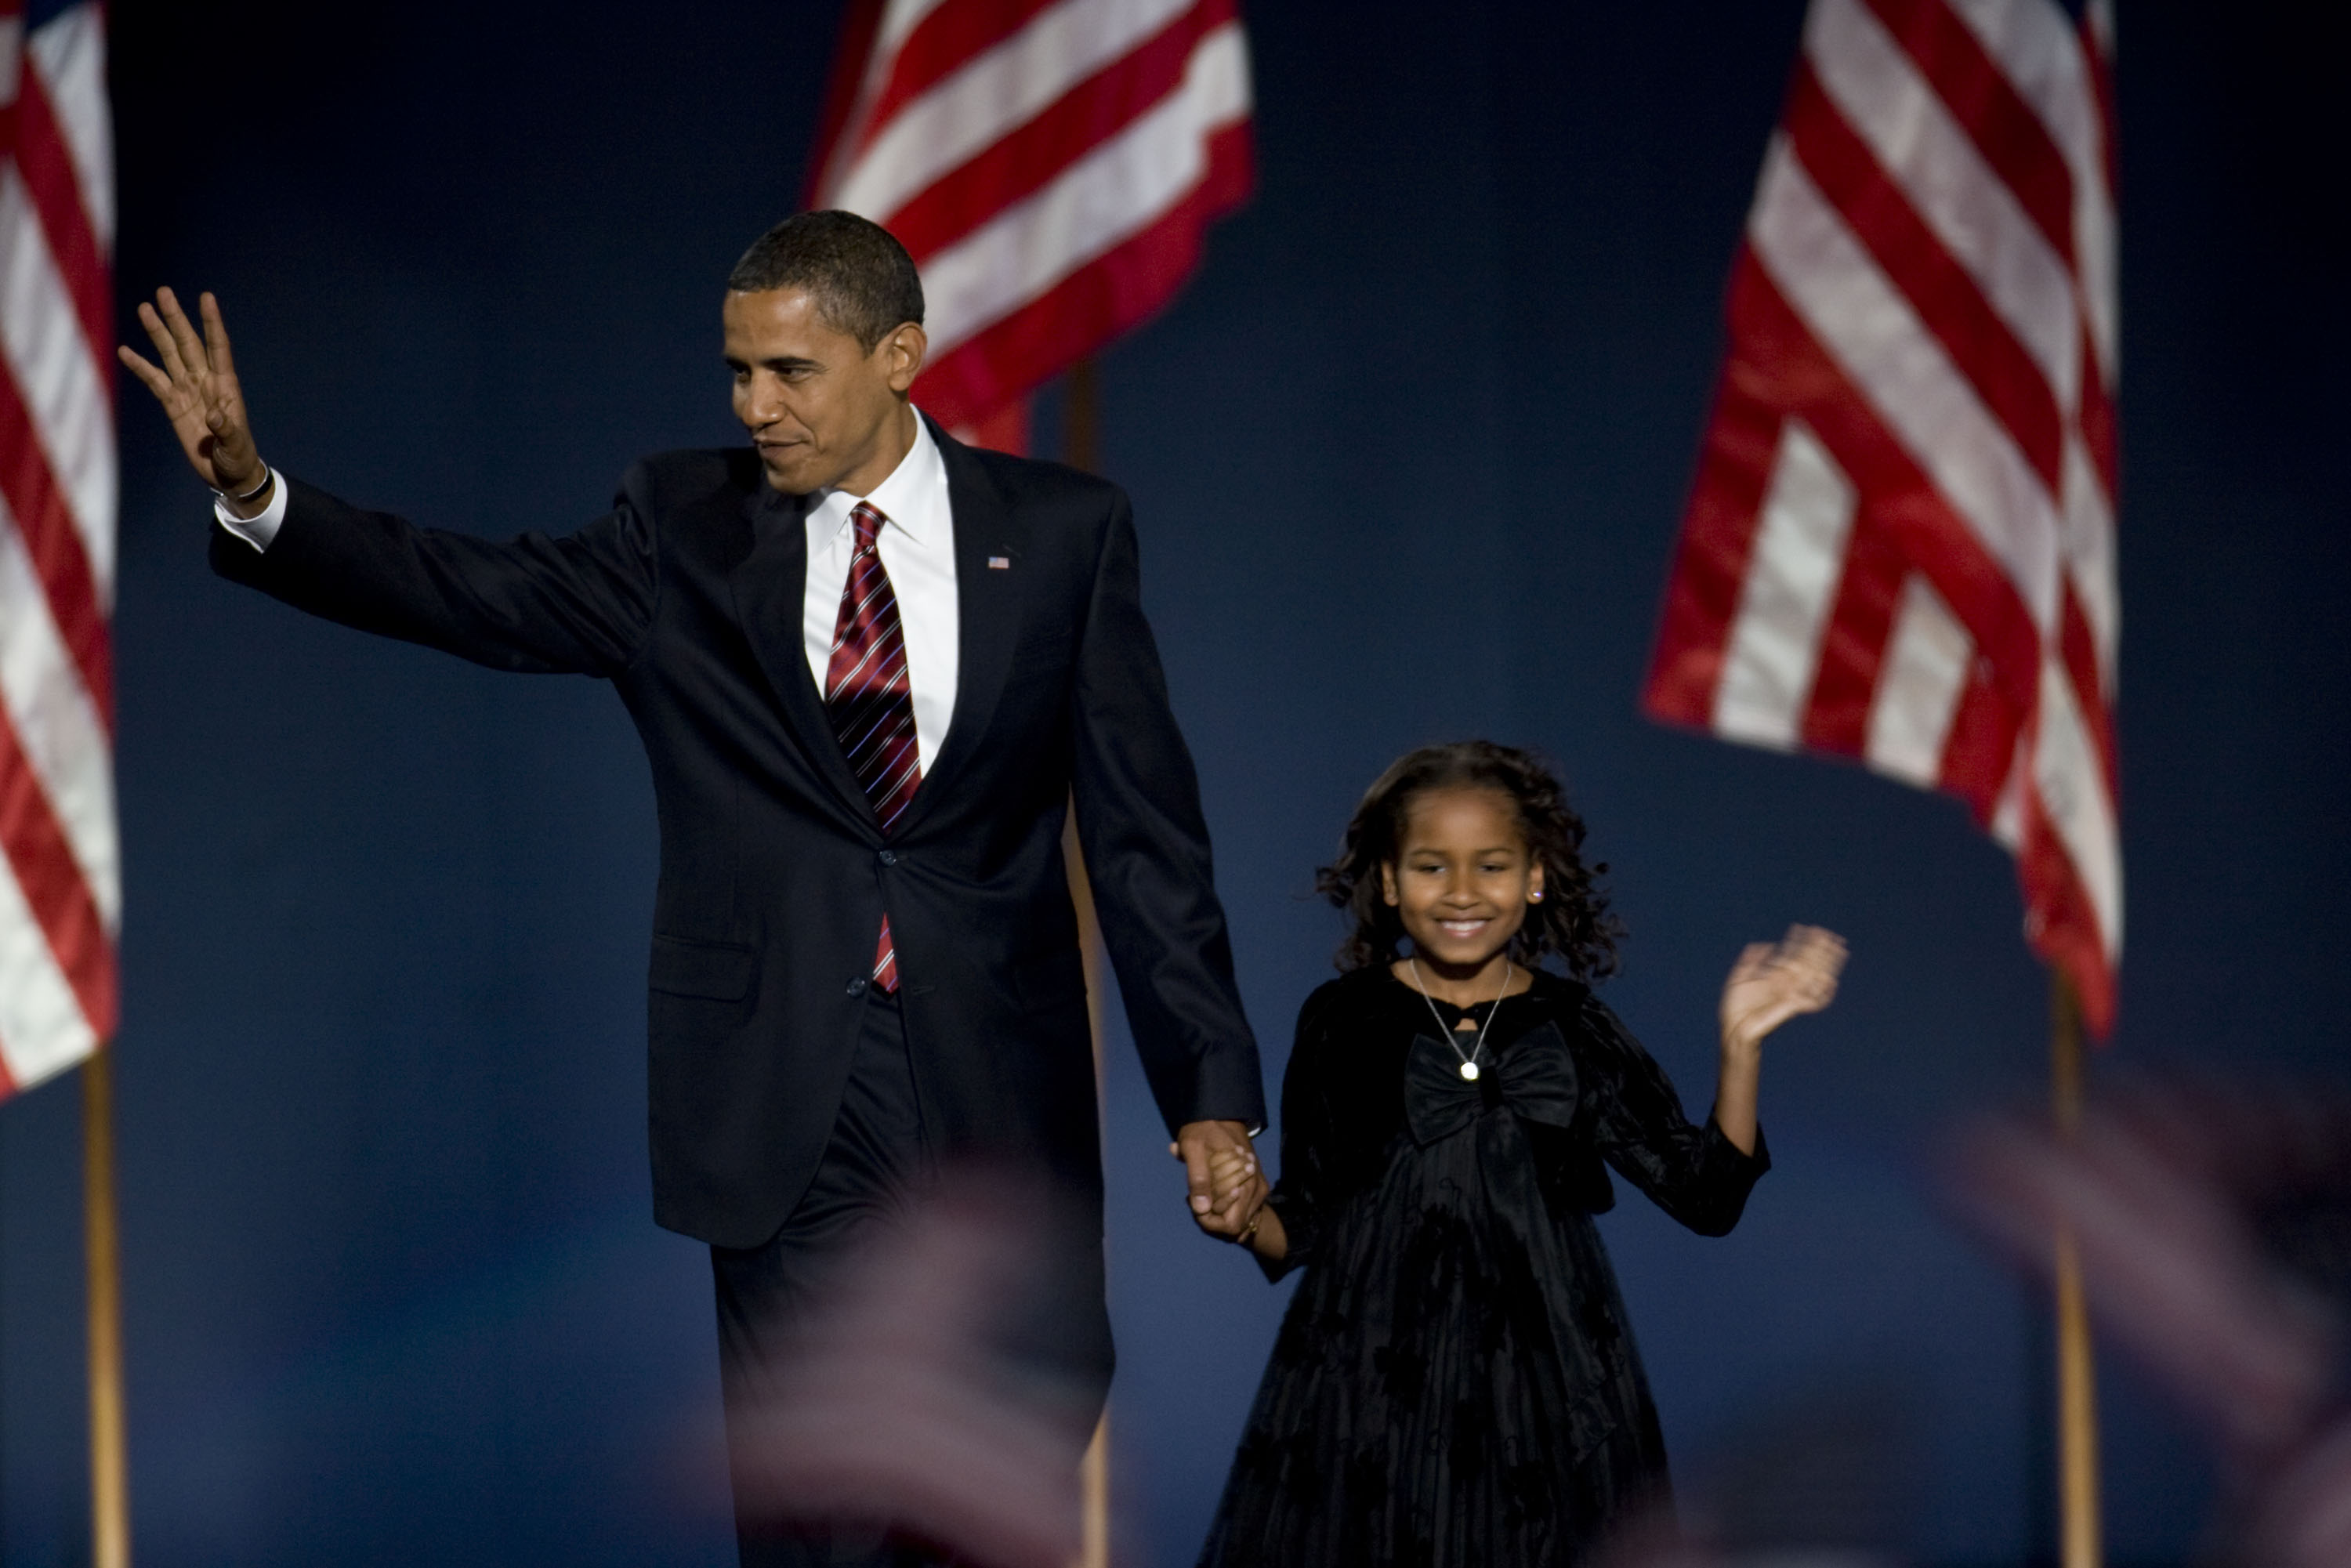 Barack and Sasha Obama during an election night gathering in Grant Park in Chicago, Illinois on November 4, 2008. | Source: Getty Images